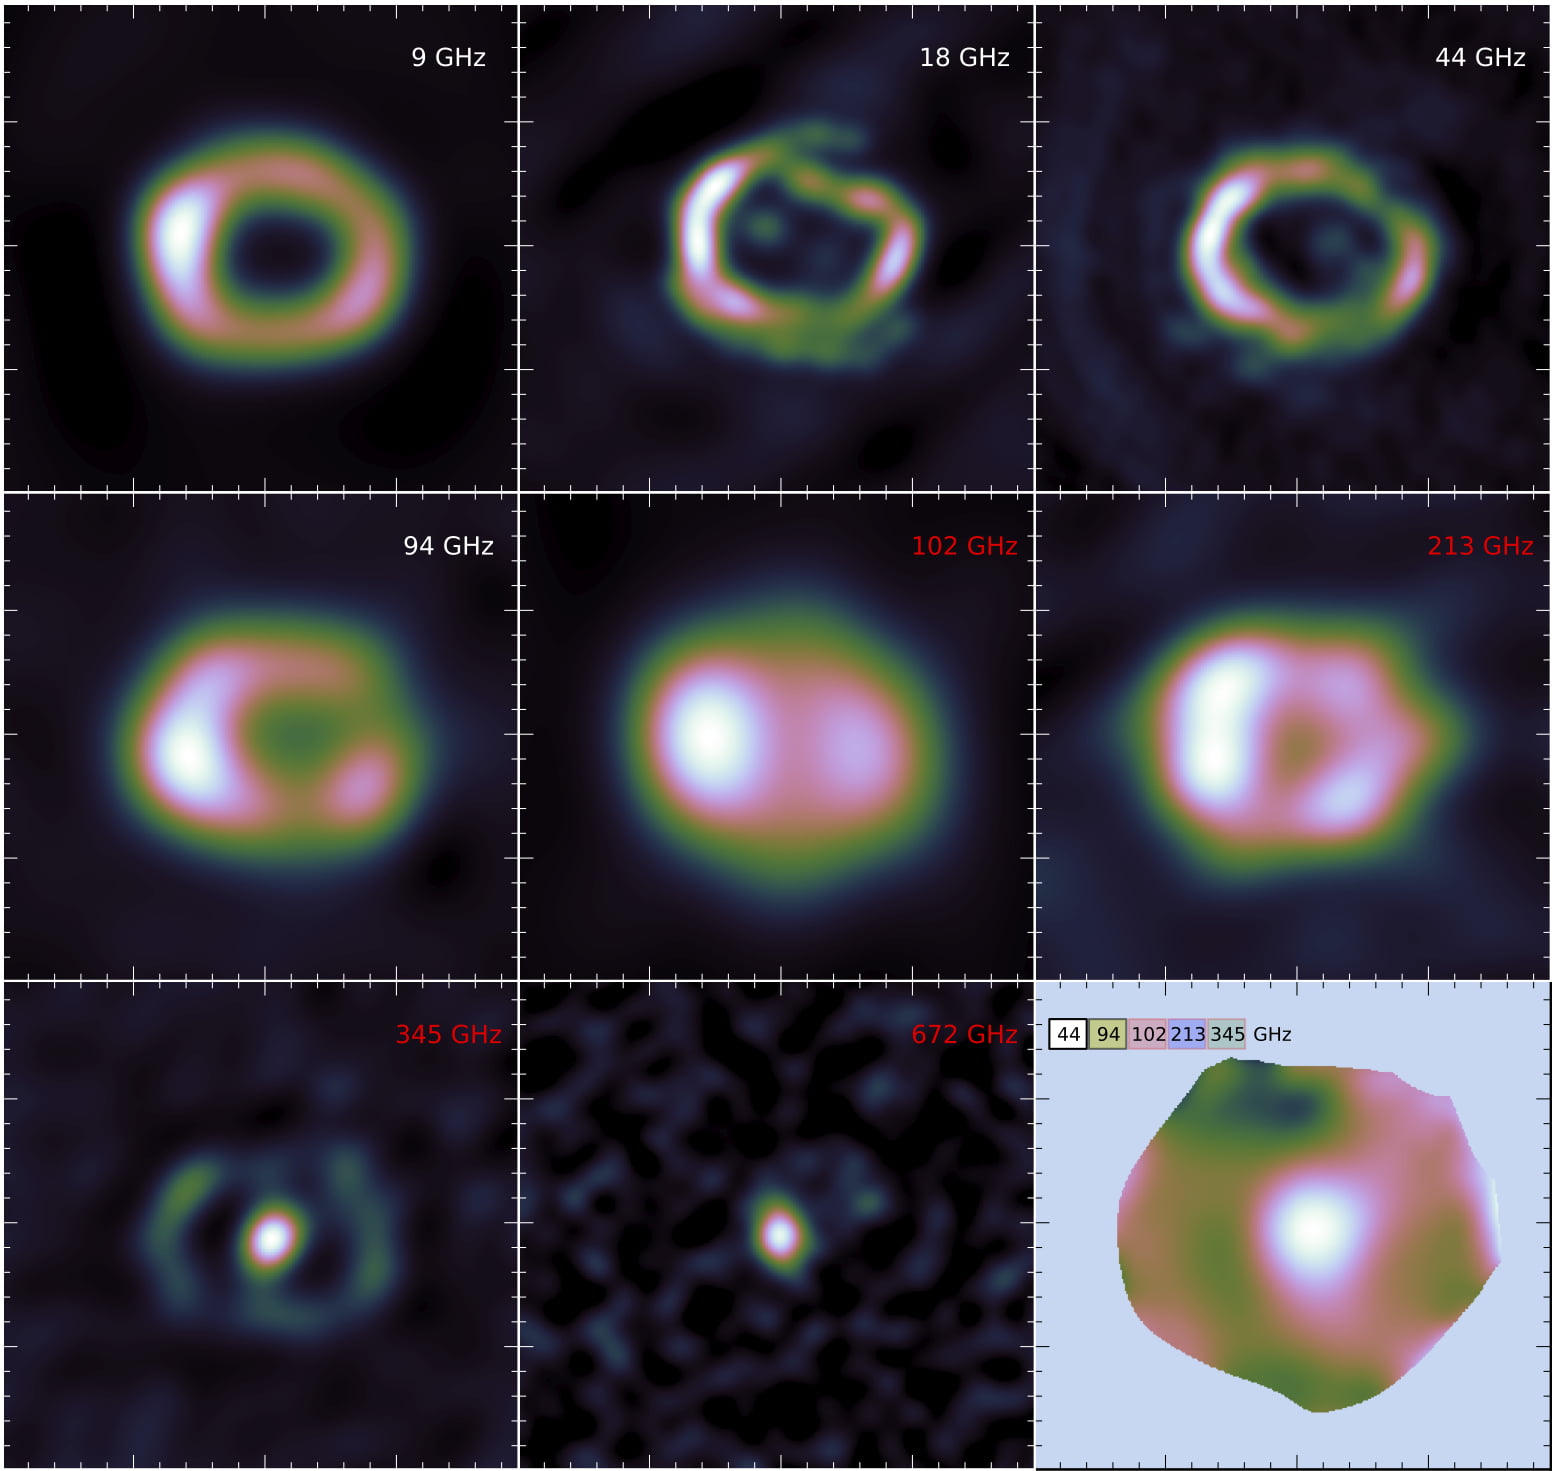 A mosaic of images showing the latest observations of Supernova remnant 1987A at radio frequencies to the far infrared. Images below 100 GHz are from observations made with the ATCA telescope (NSW, Australia), and images above 100 GHz are from the ALMA telescope (Chile). The map on the bottom right of the mosaic is obtained by combining five images. This is used to investigate whether there is a pulsar wind nebula inside the remnant. Credit: G. Zanardo, ICRAR-UWA